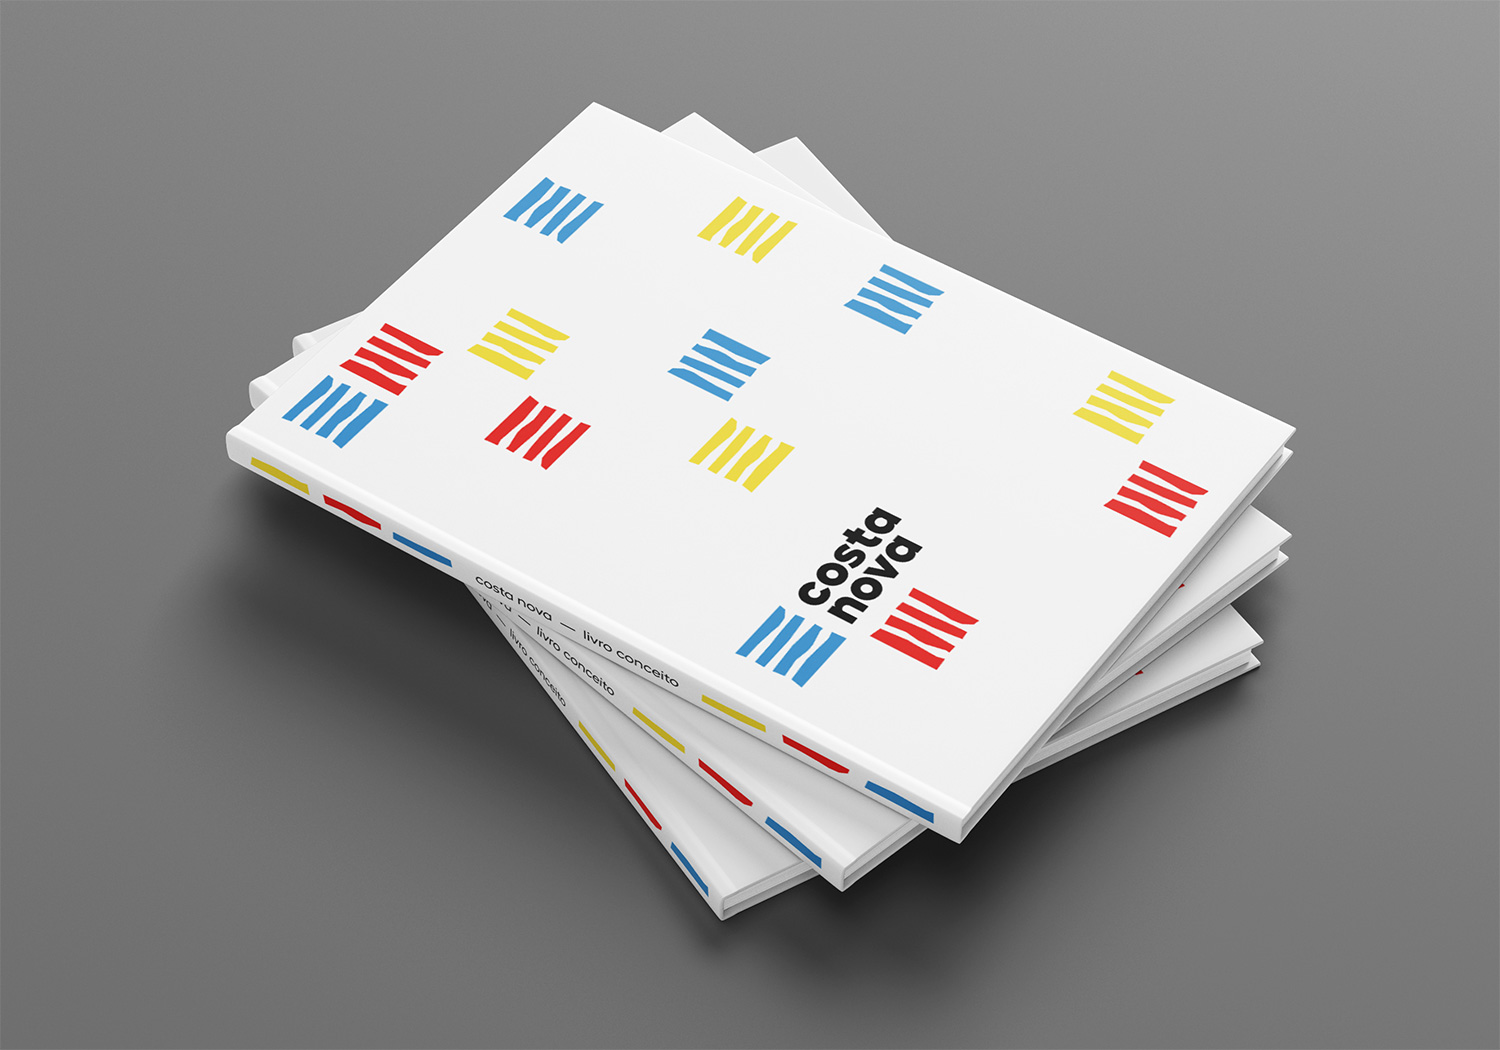 White book cover with colorful elements of the logo.